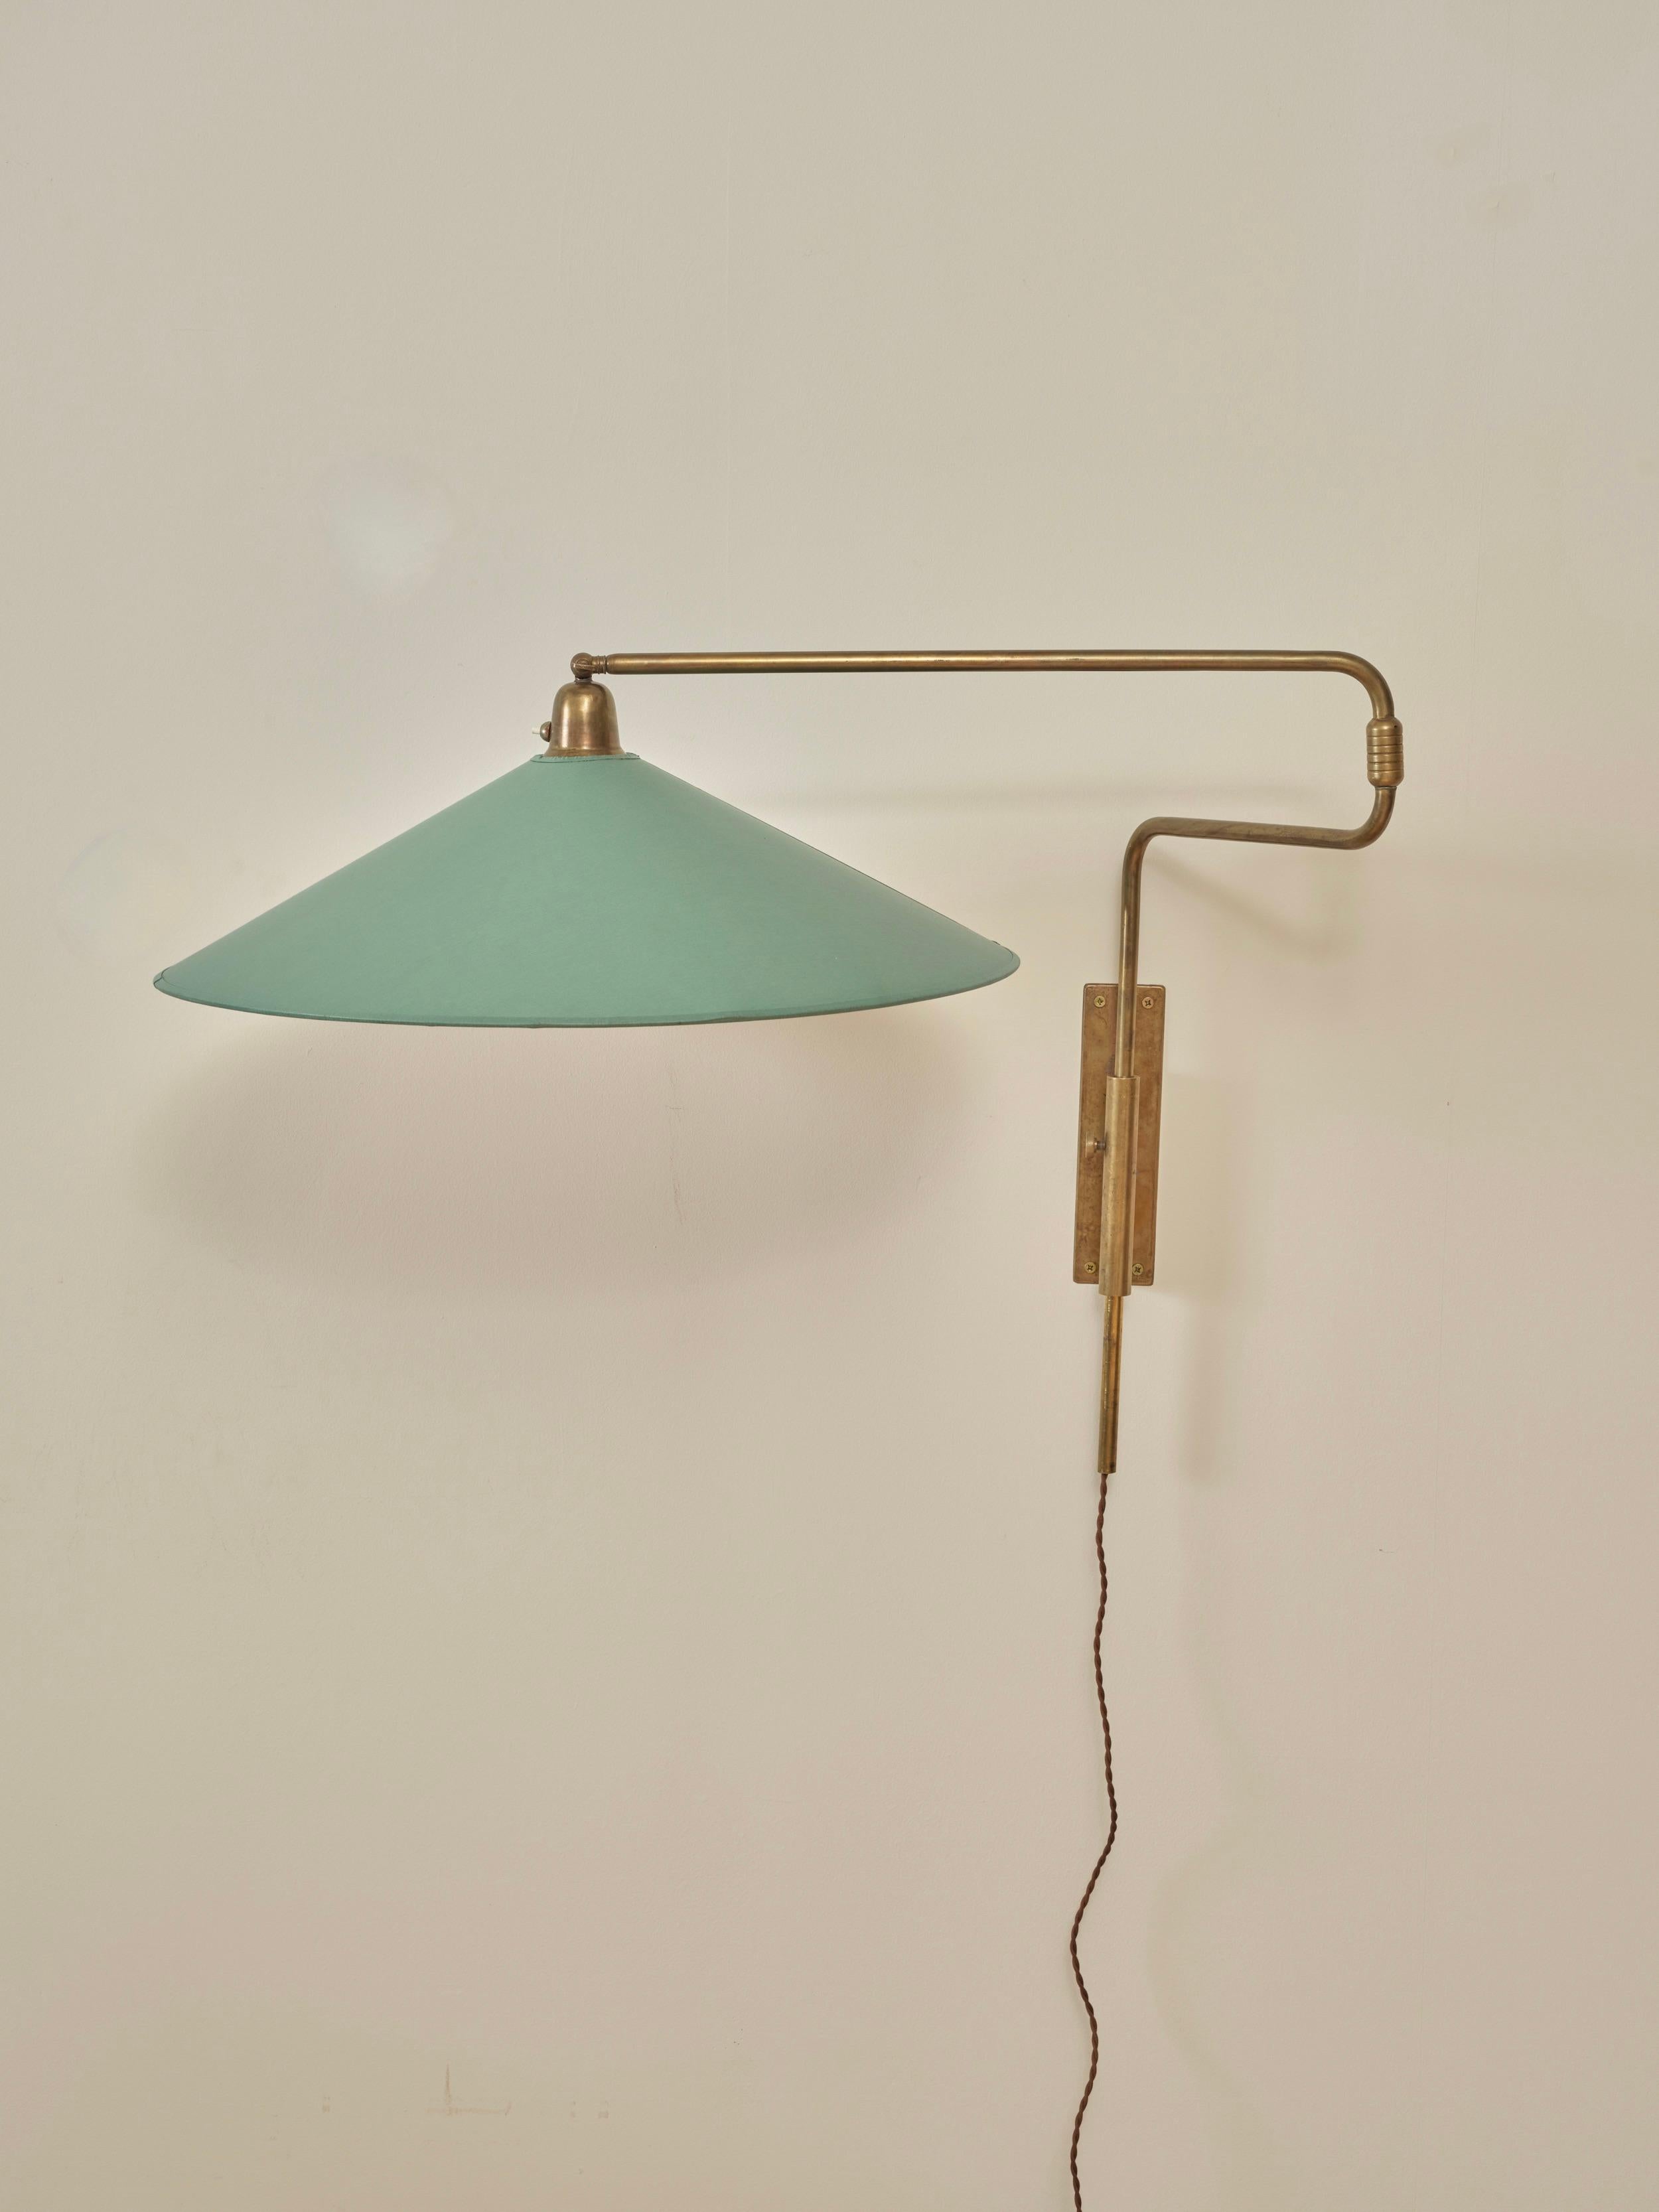 Italian Wall Sconce by Azucena, circa 1950s, featuring a large cloth shade and brass hardware.

